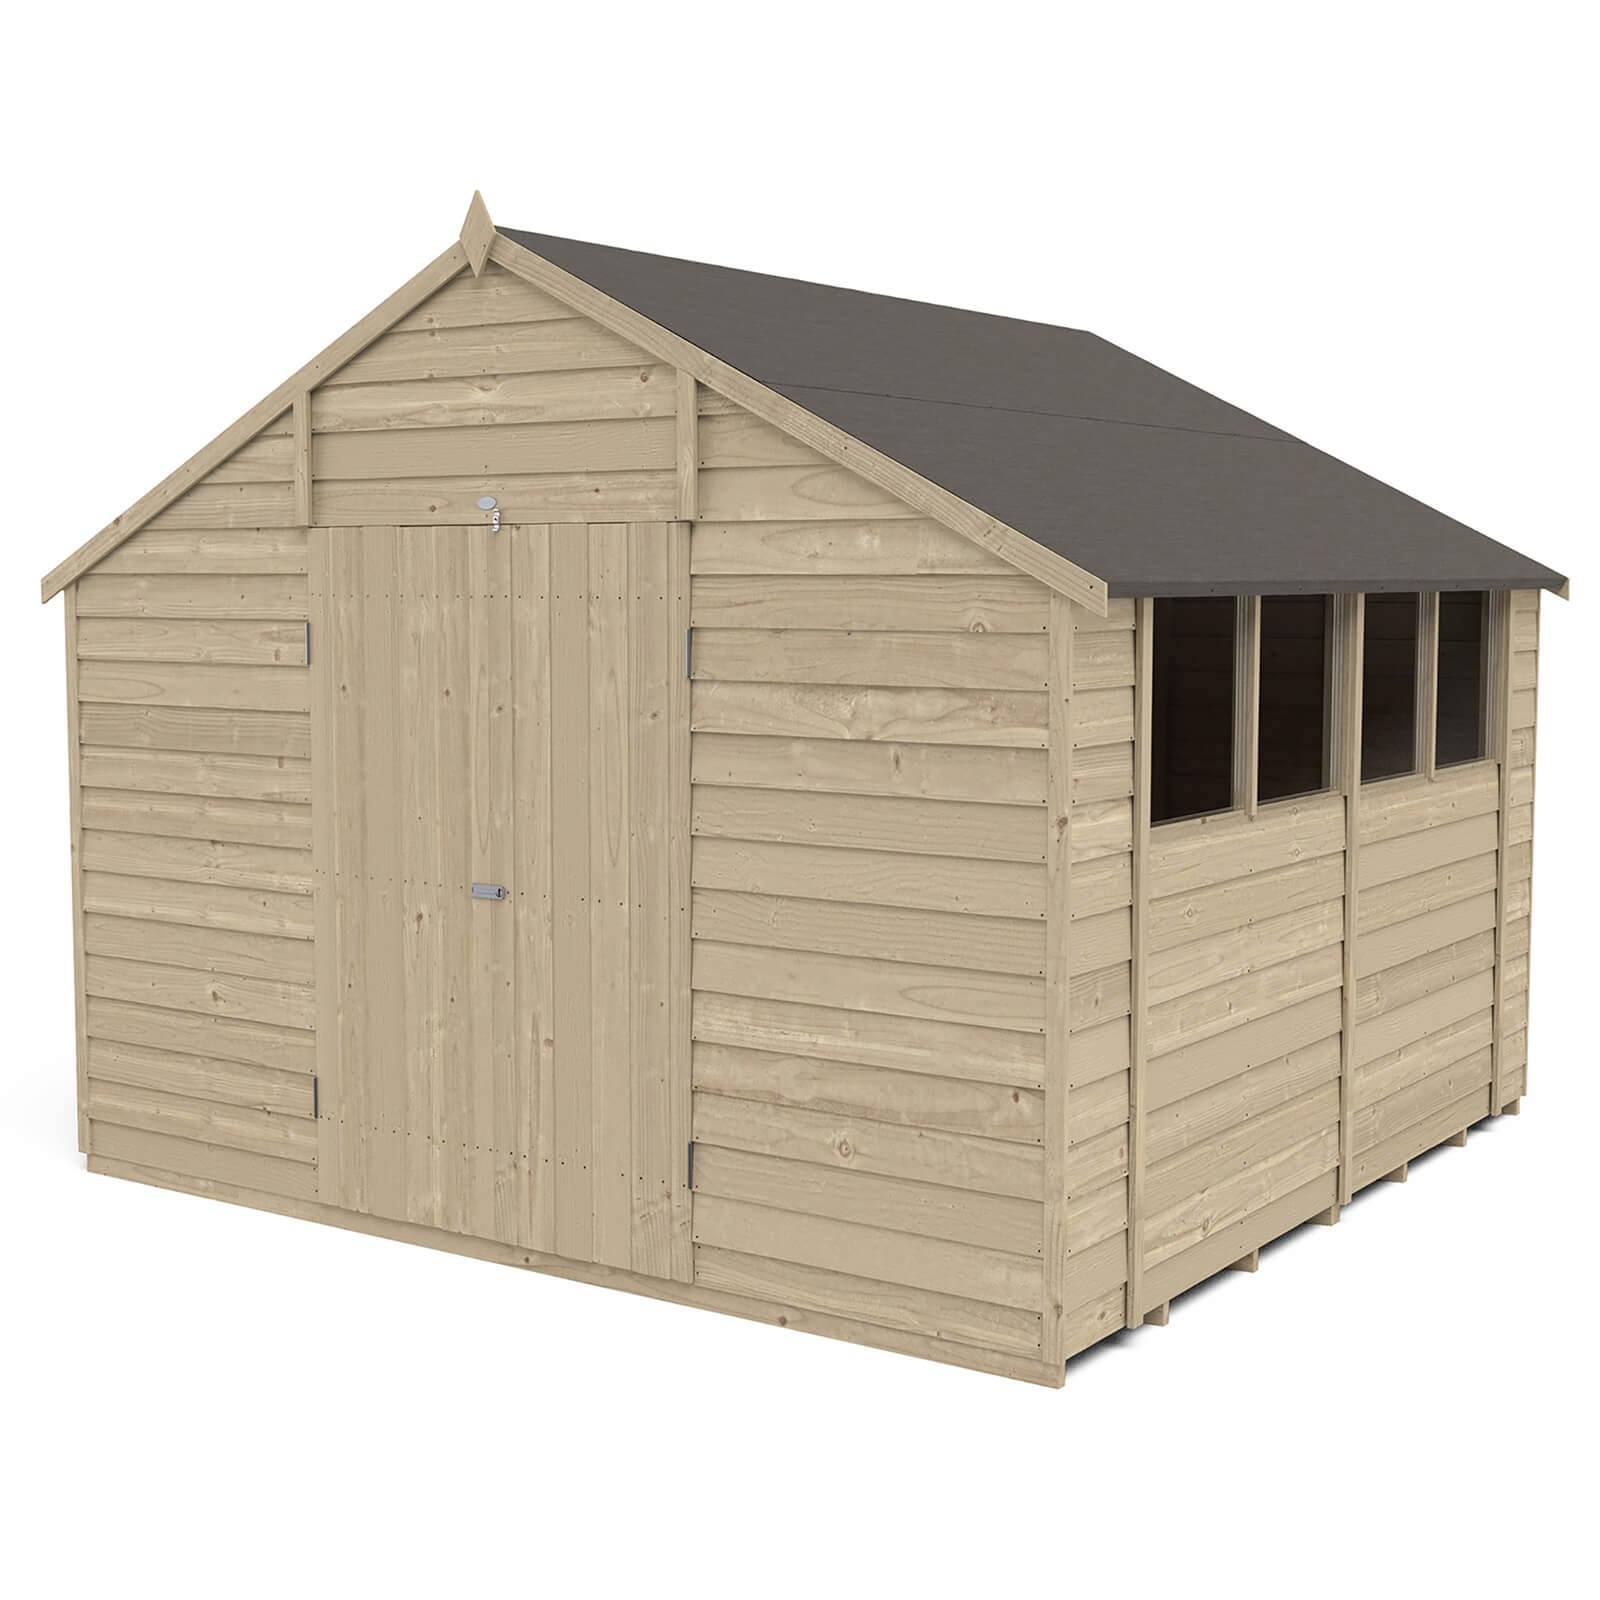 Forest 10 x 10ft Overlap Pressure Treated Double Door Apex Shed